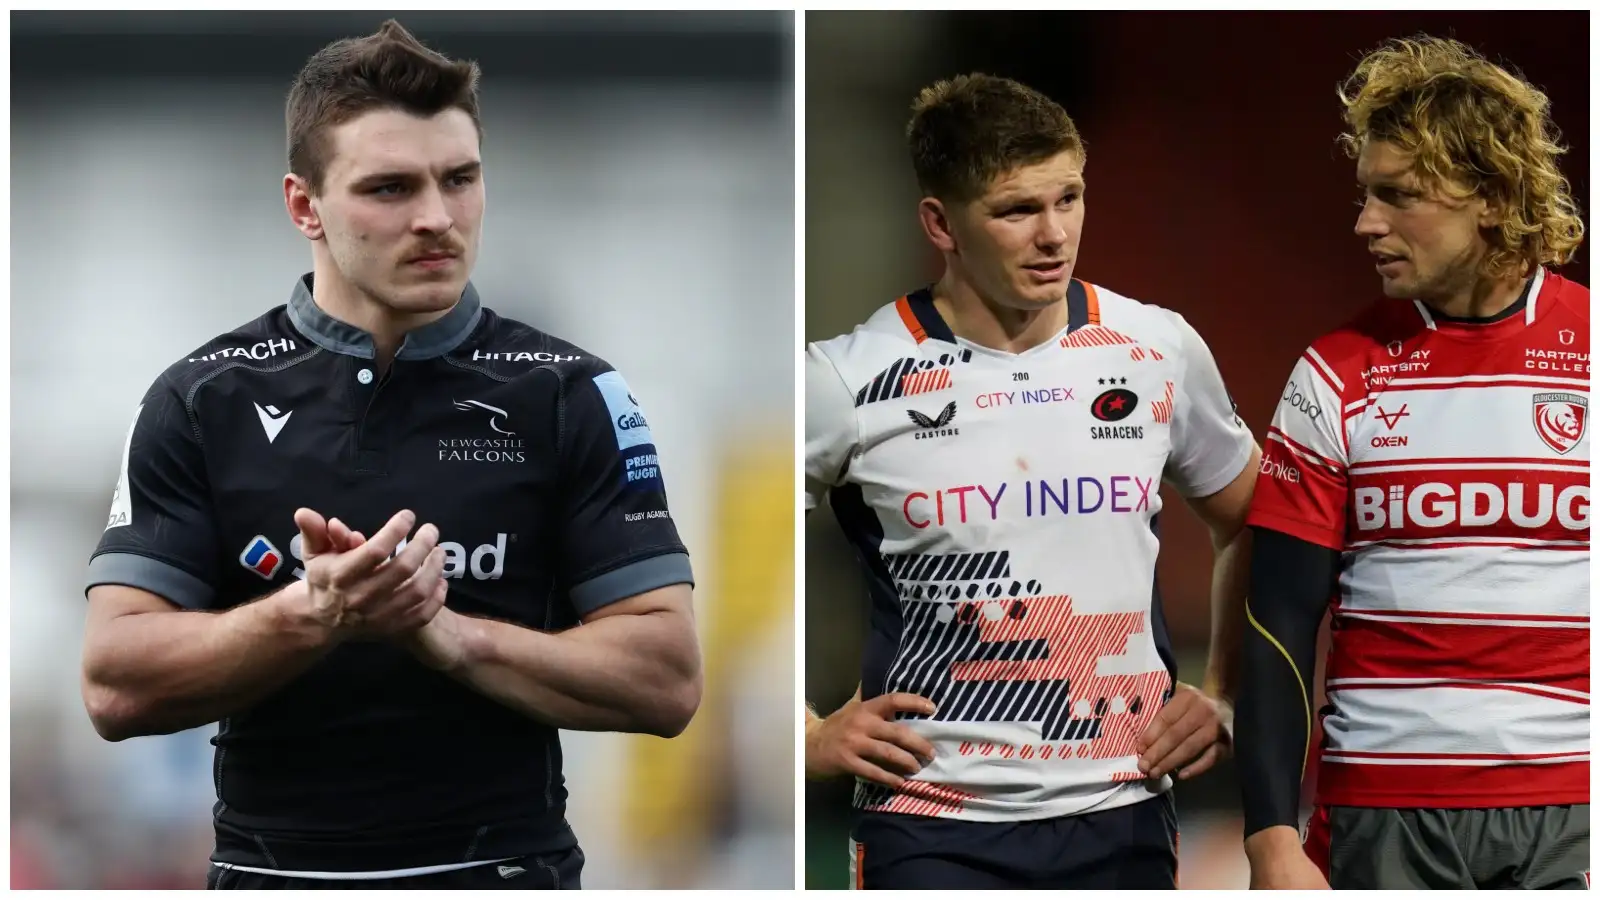 Who’s hot and who’s not: Mateo Carreras and a major shock catch the eye while Owen Farrell technique and Six Nations concerns grow